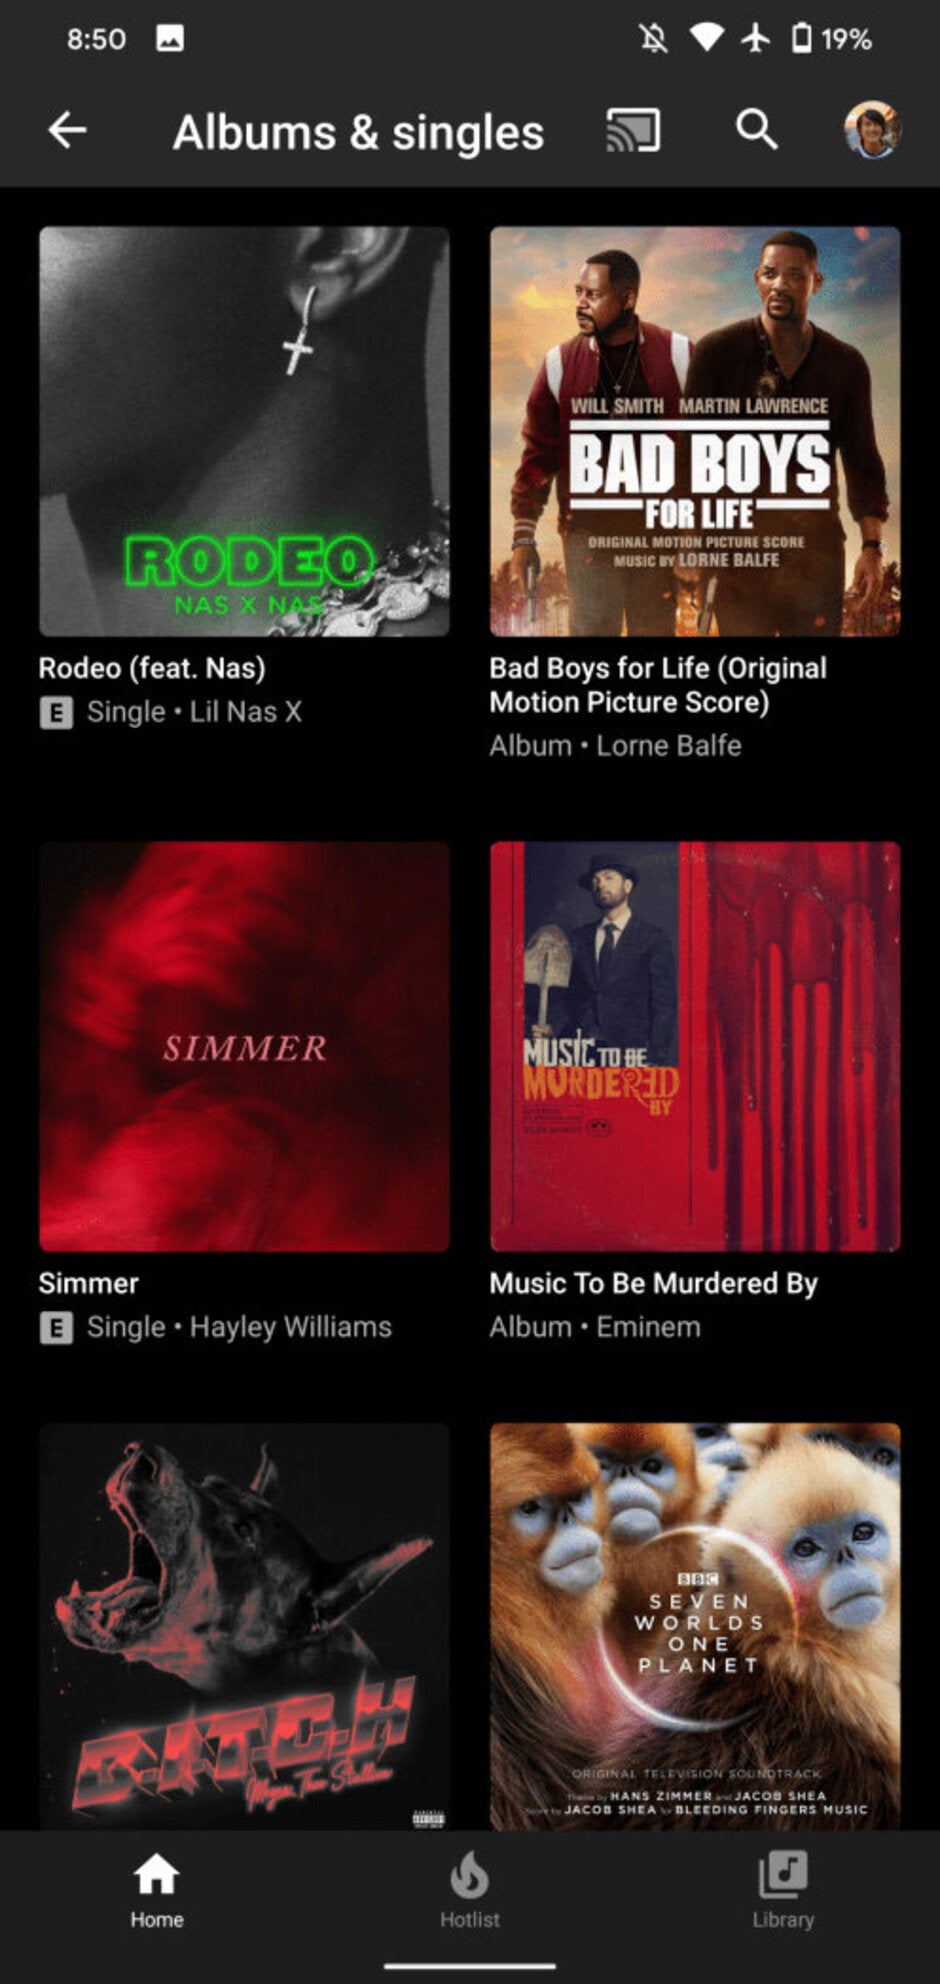 YouTube Music gains option to explore new releases on Android and iOS